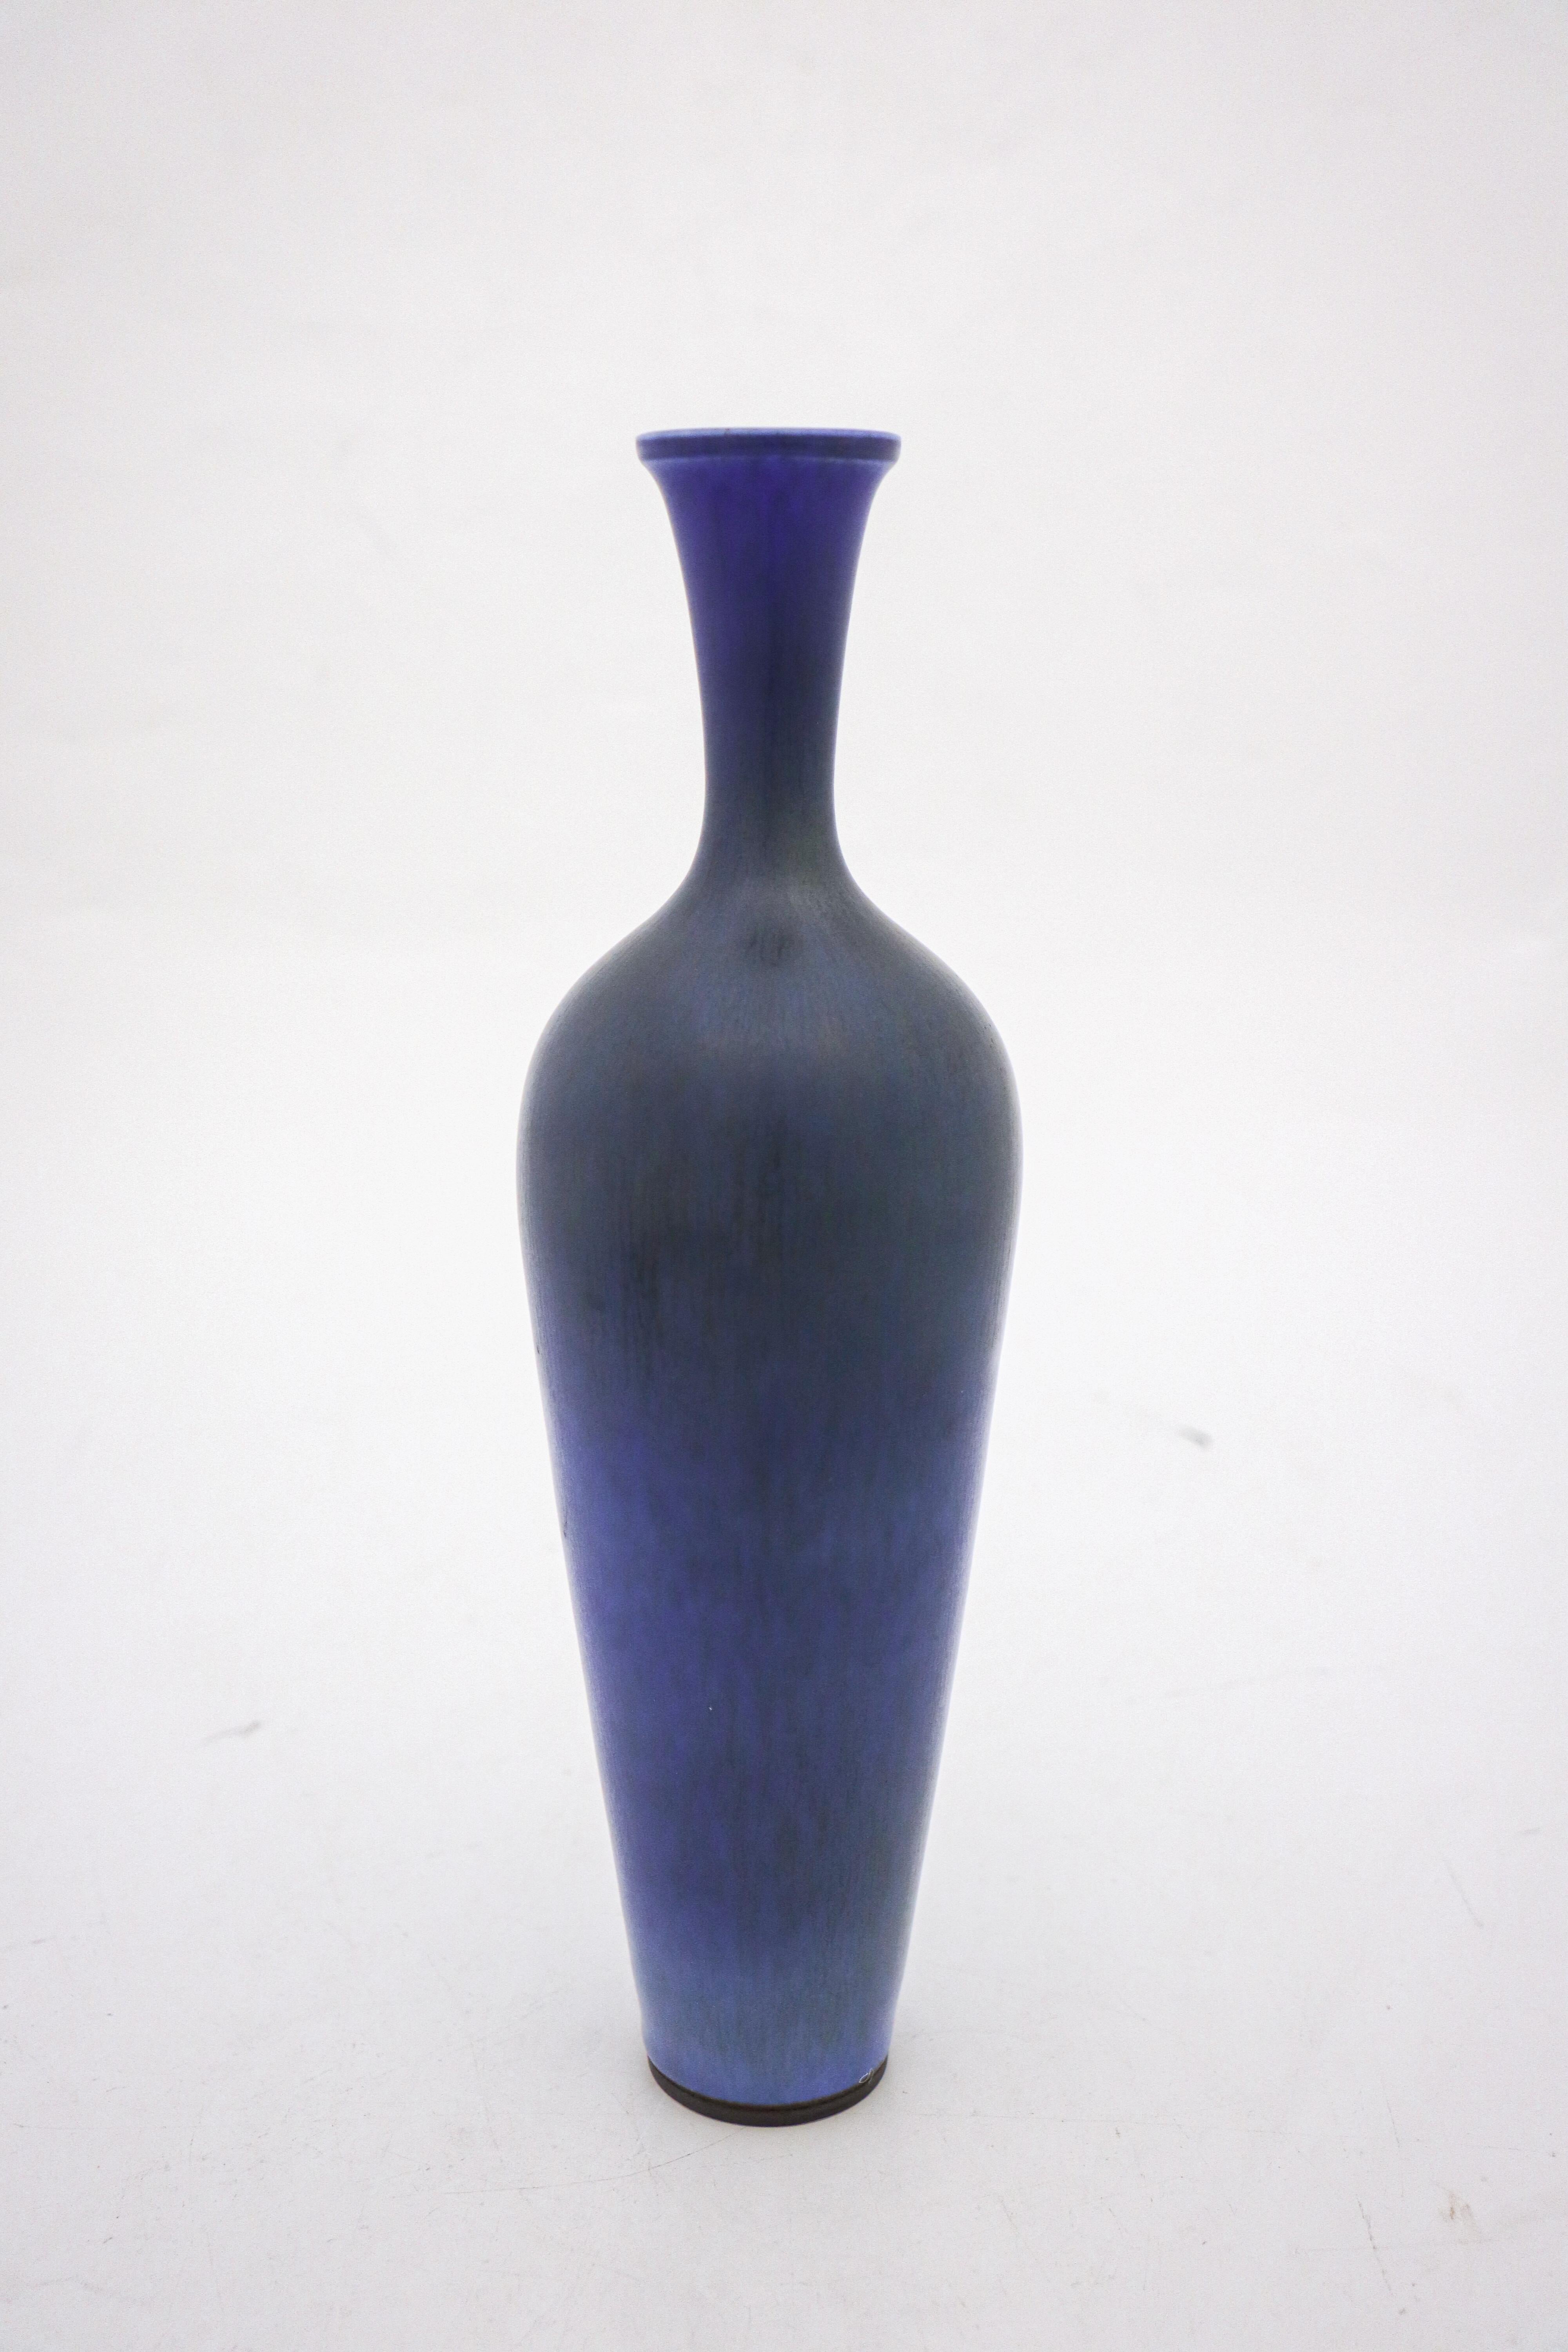 A lovely vase with a dark blue har fur glaze designed by Berndt Friberg at Gustavsberg in Stockholm, the vase is 27 cm high. It's marked as on picture and was made in 1960. It is in excellent condition.